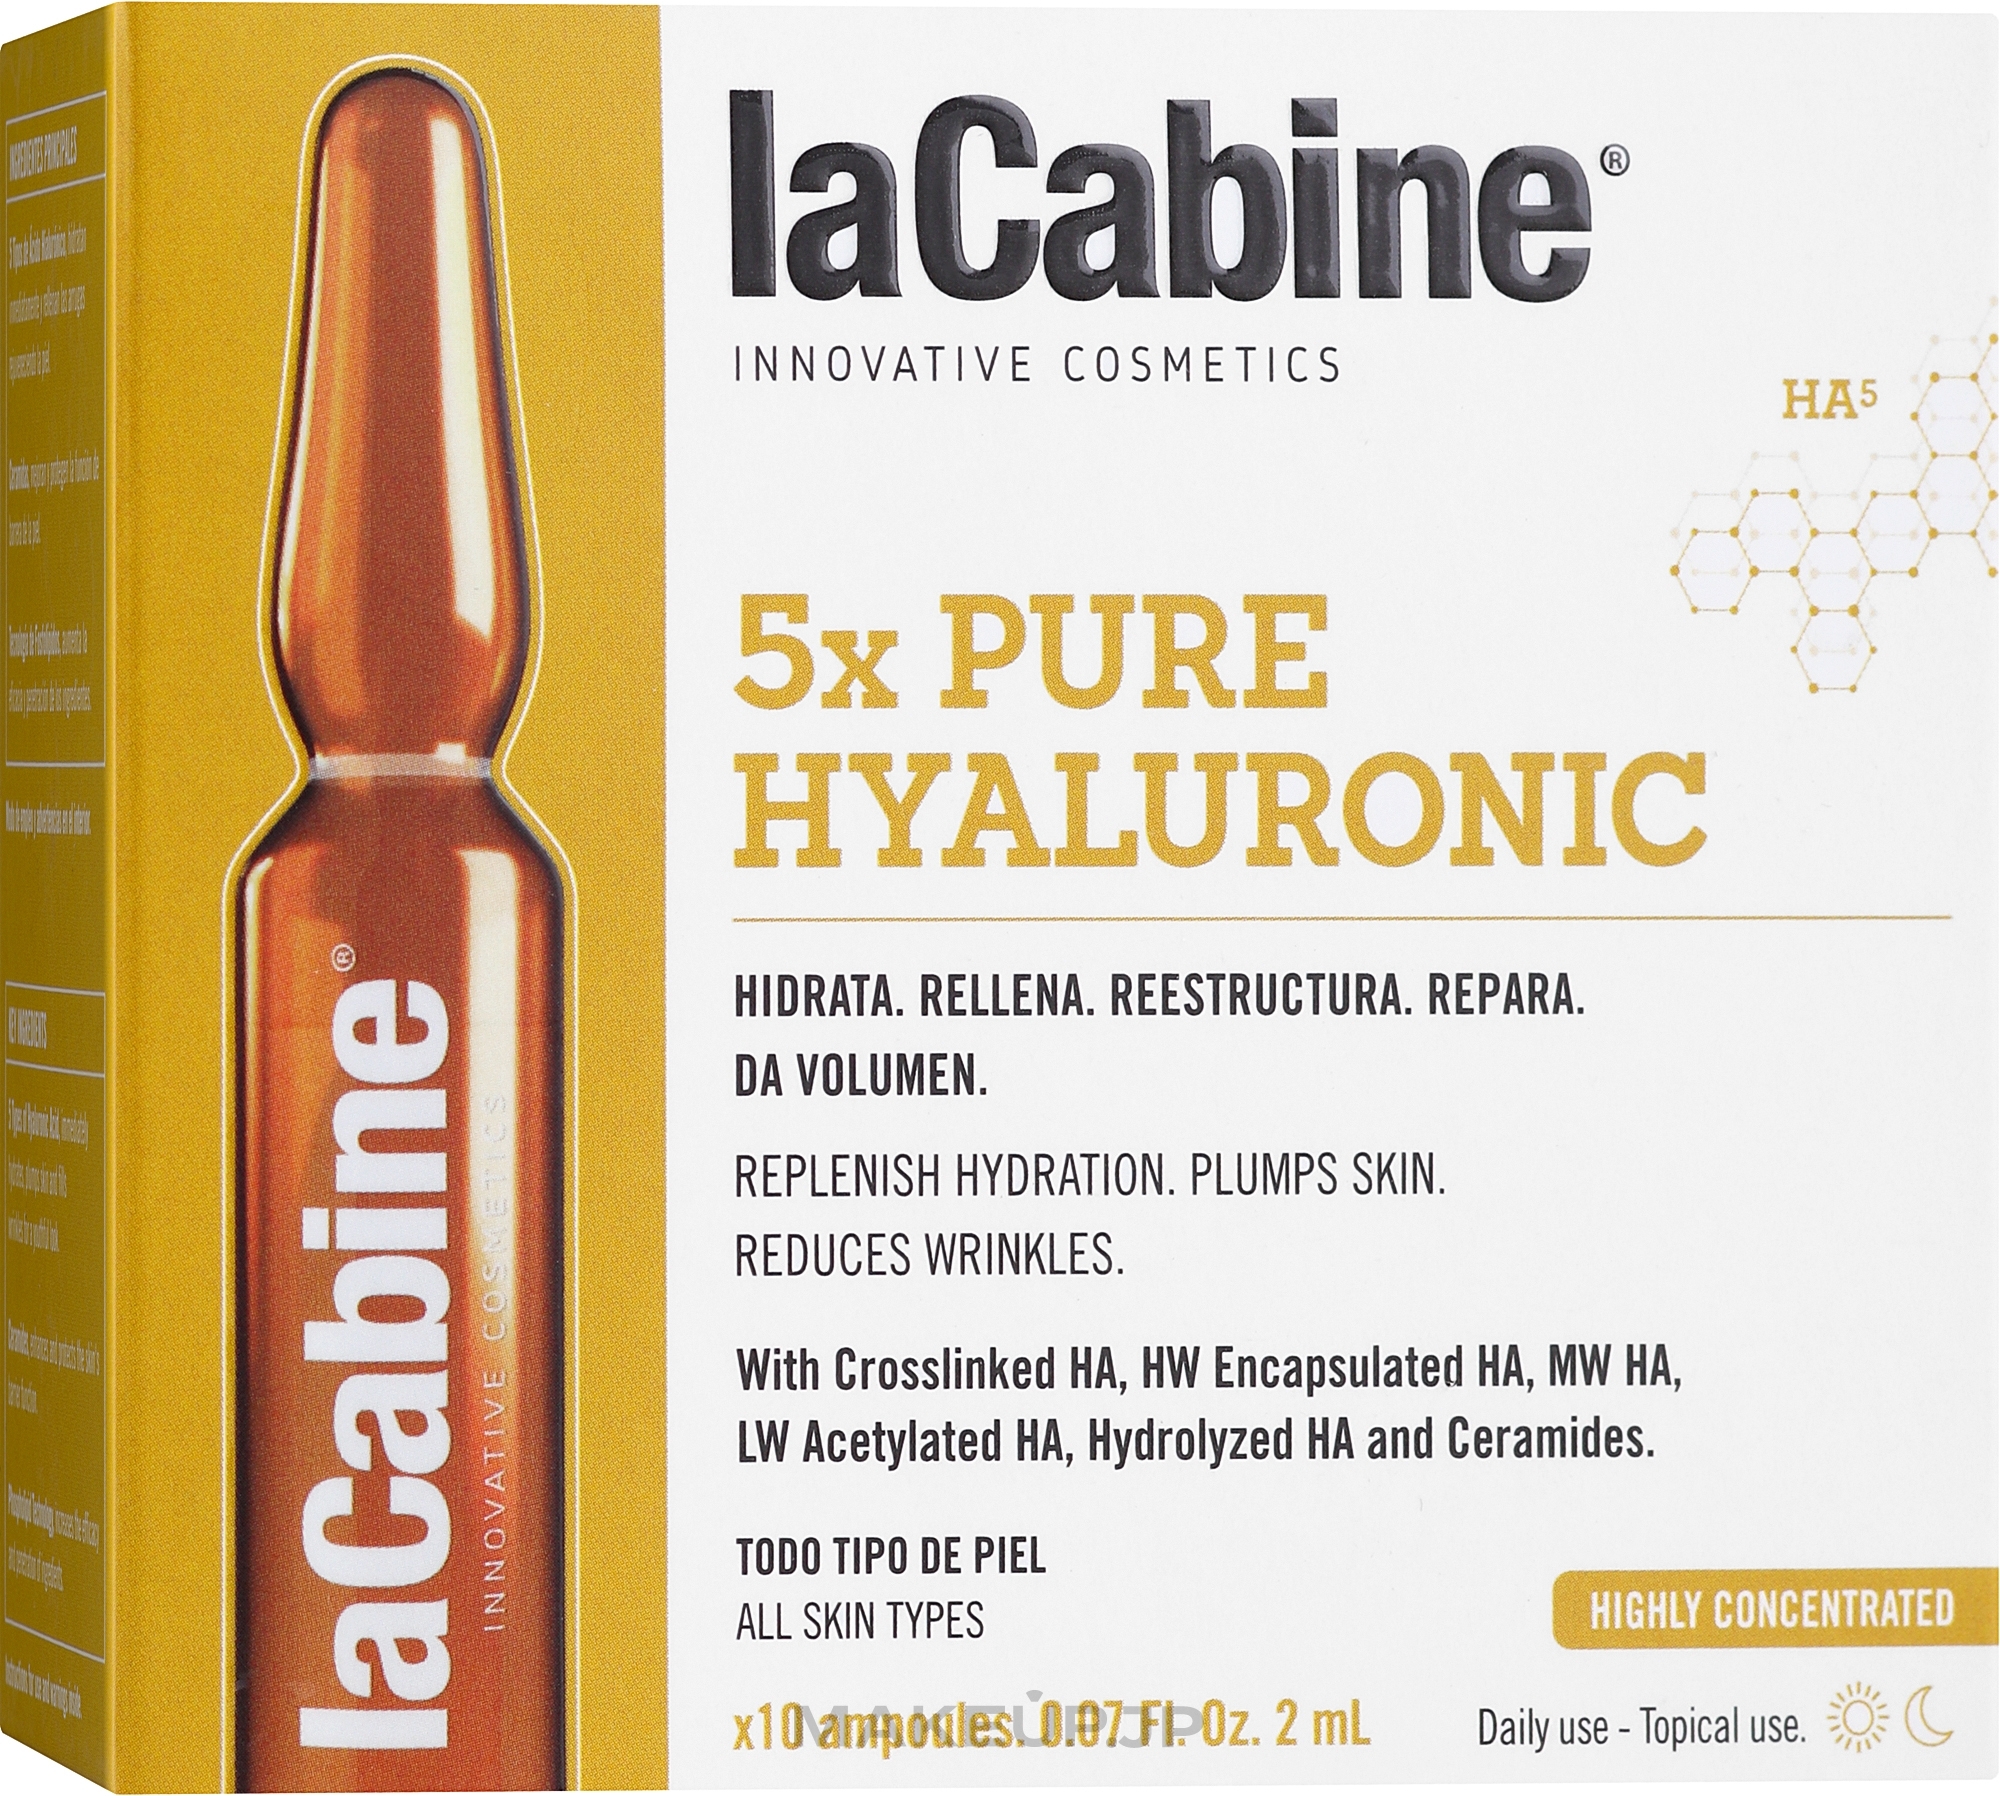 Hyaluronic Face Ampoules - La Cabine 5x Hyaluronic Pure Ampoules — photo 10 x 2 ml